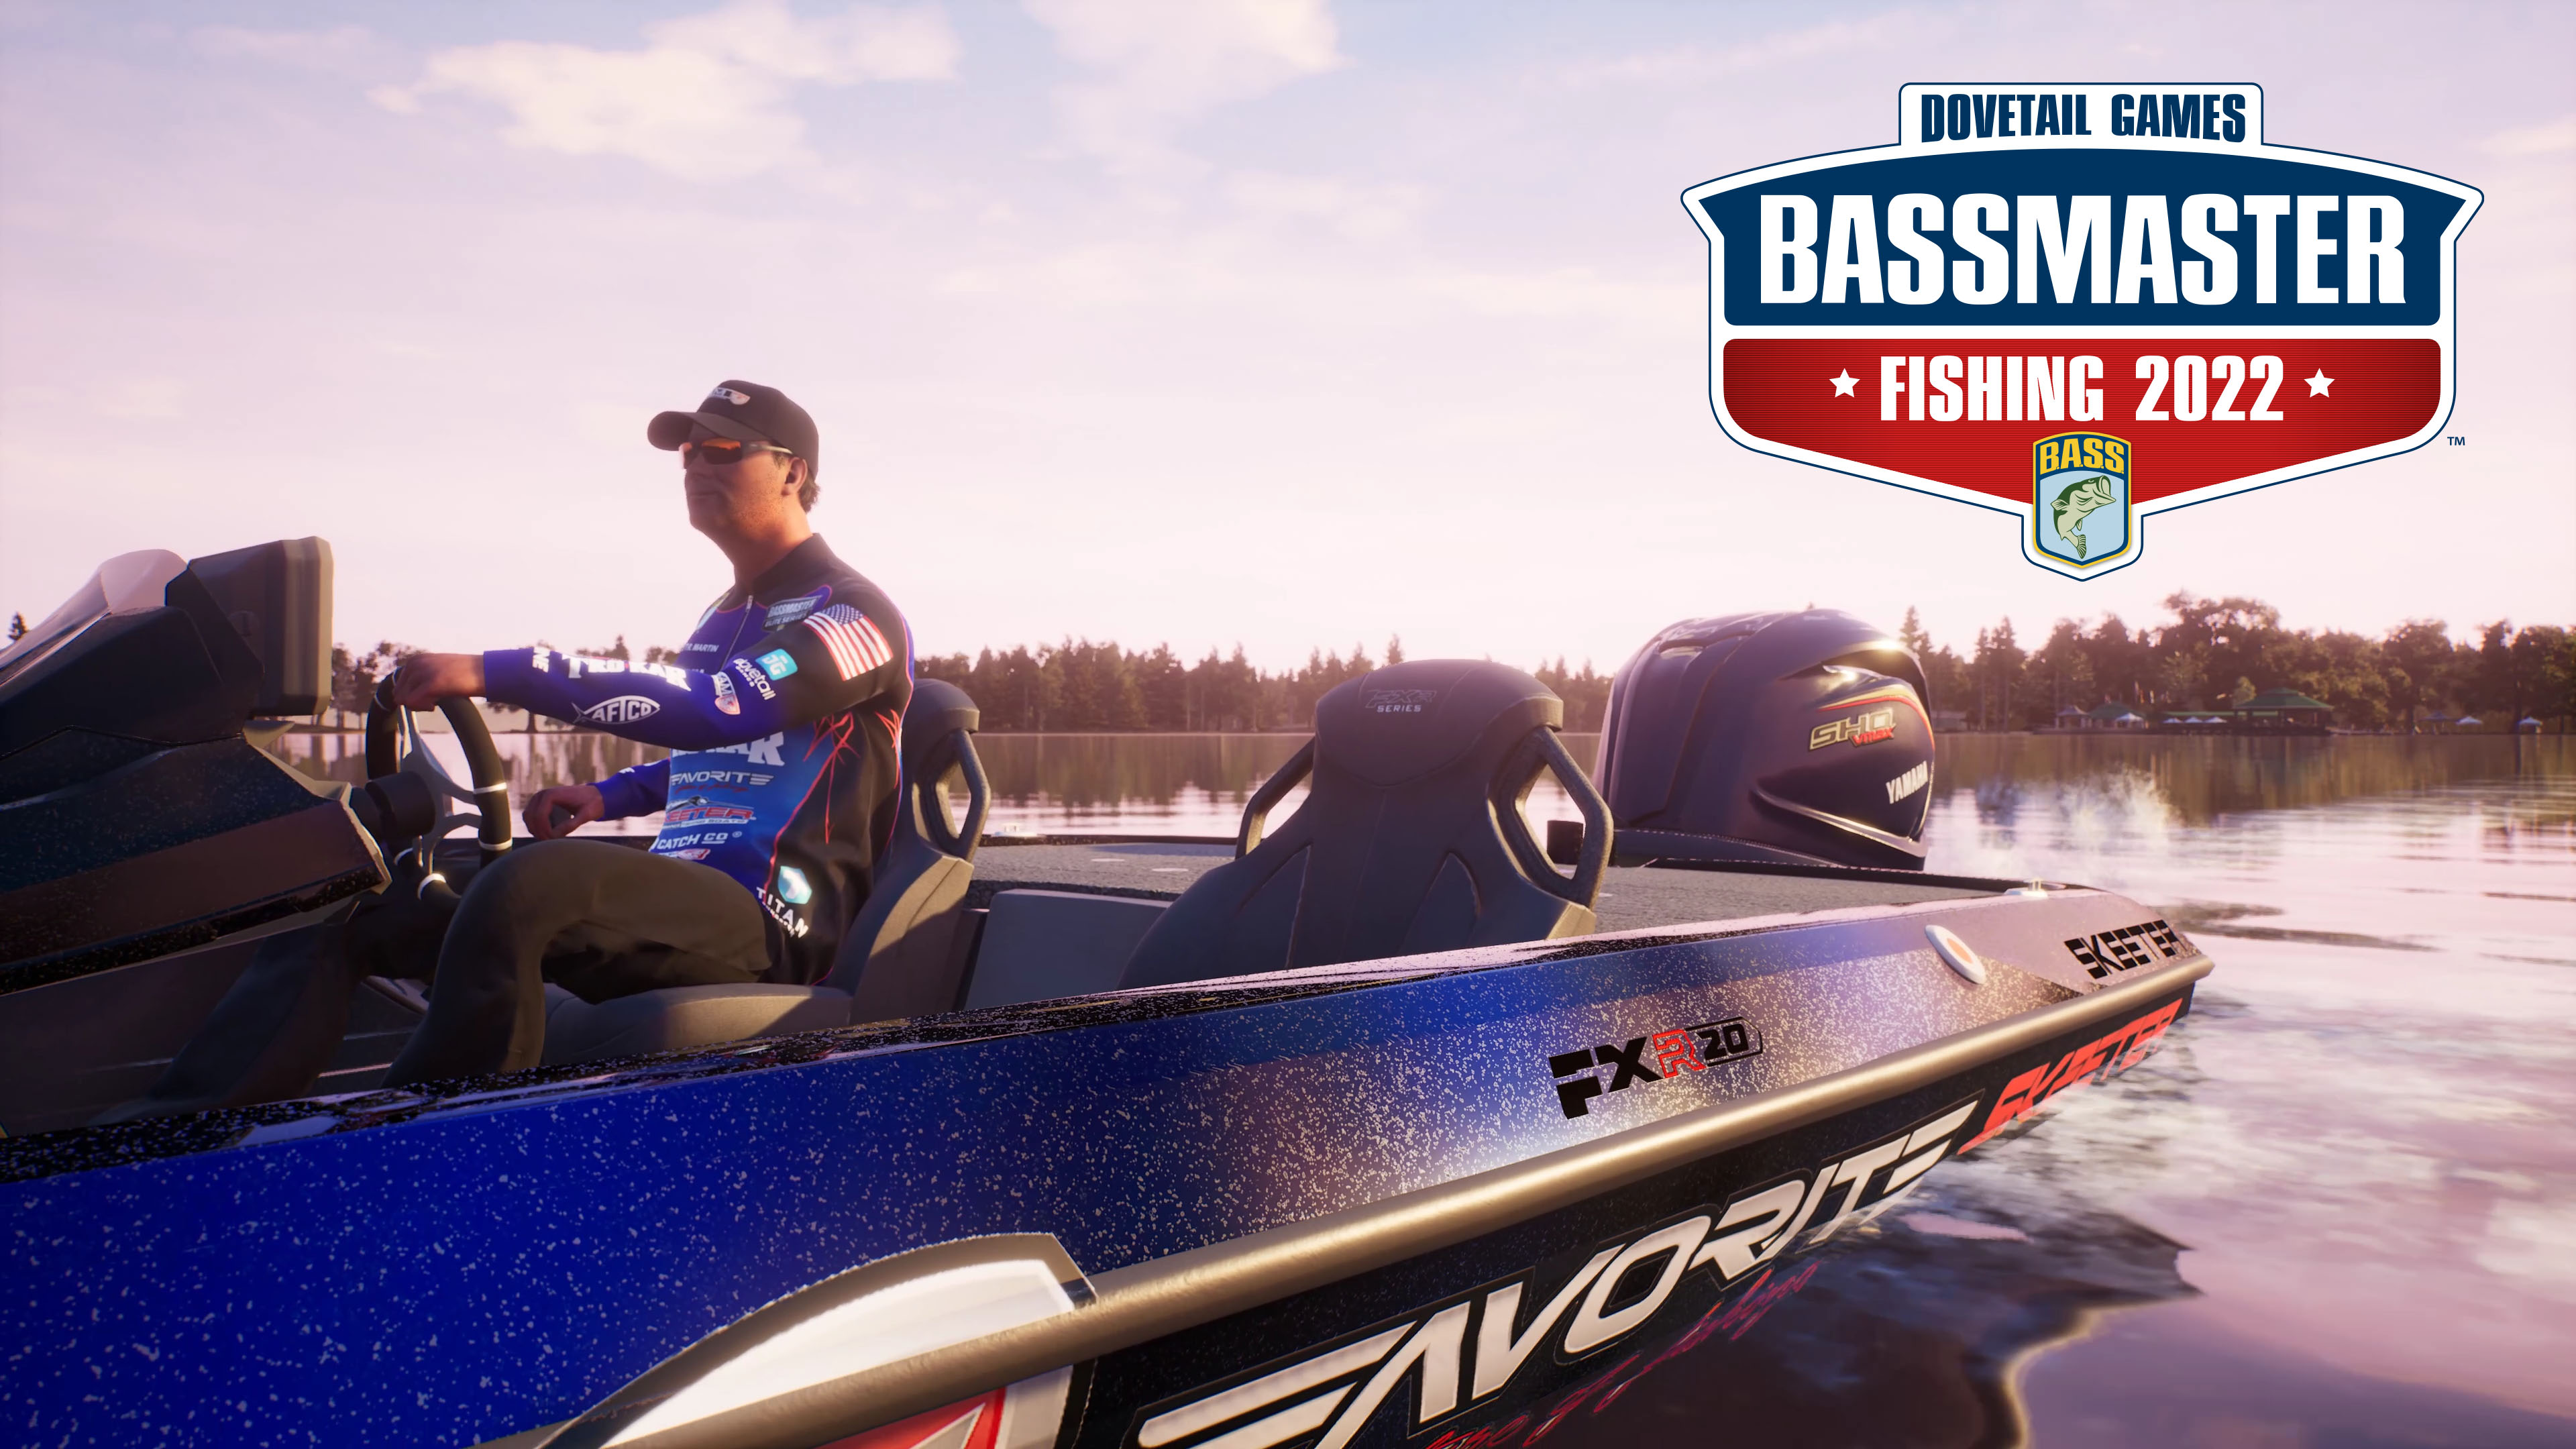 Video For Bassmaster Fishing 2022 Launching Day One with Xbox Game Pass on October 28